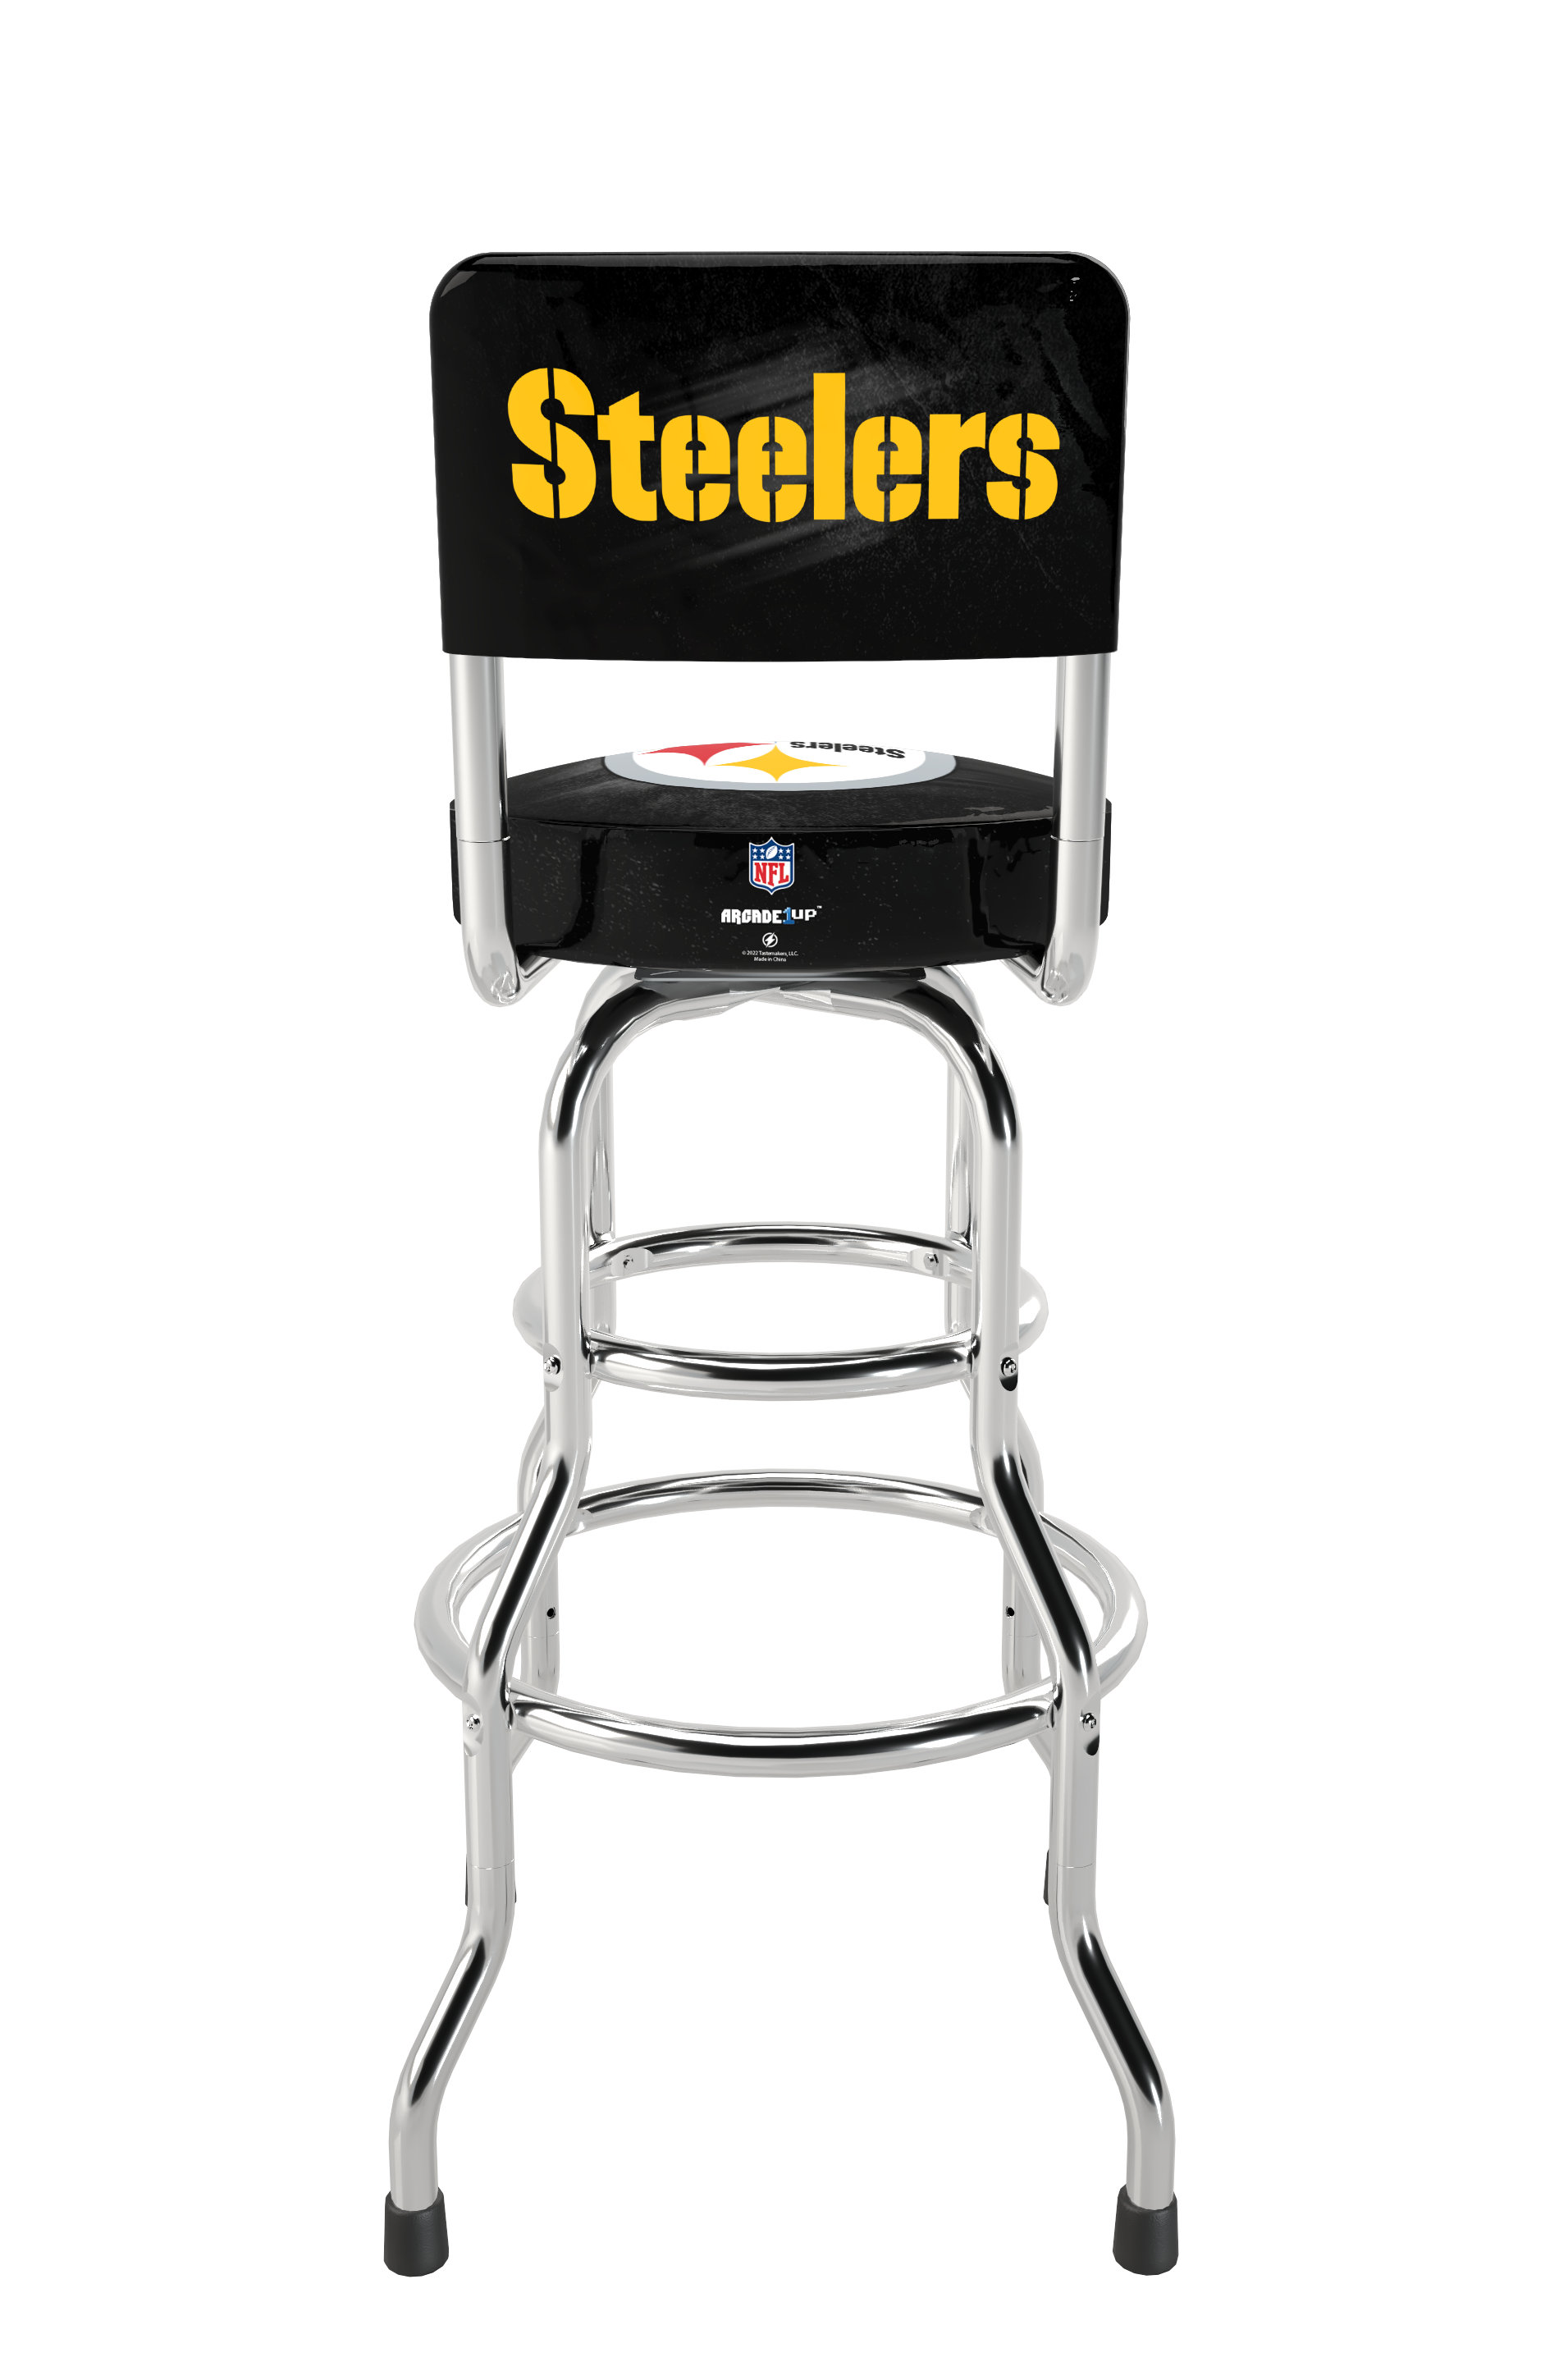 Officially Licensed NFL Pittsburgh Steelers Mini Portable Table